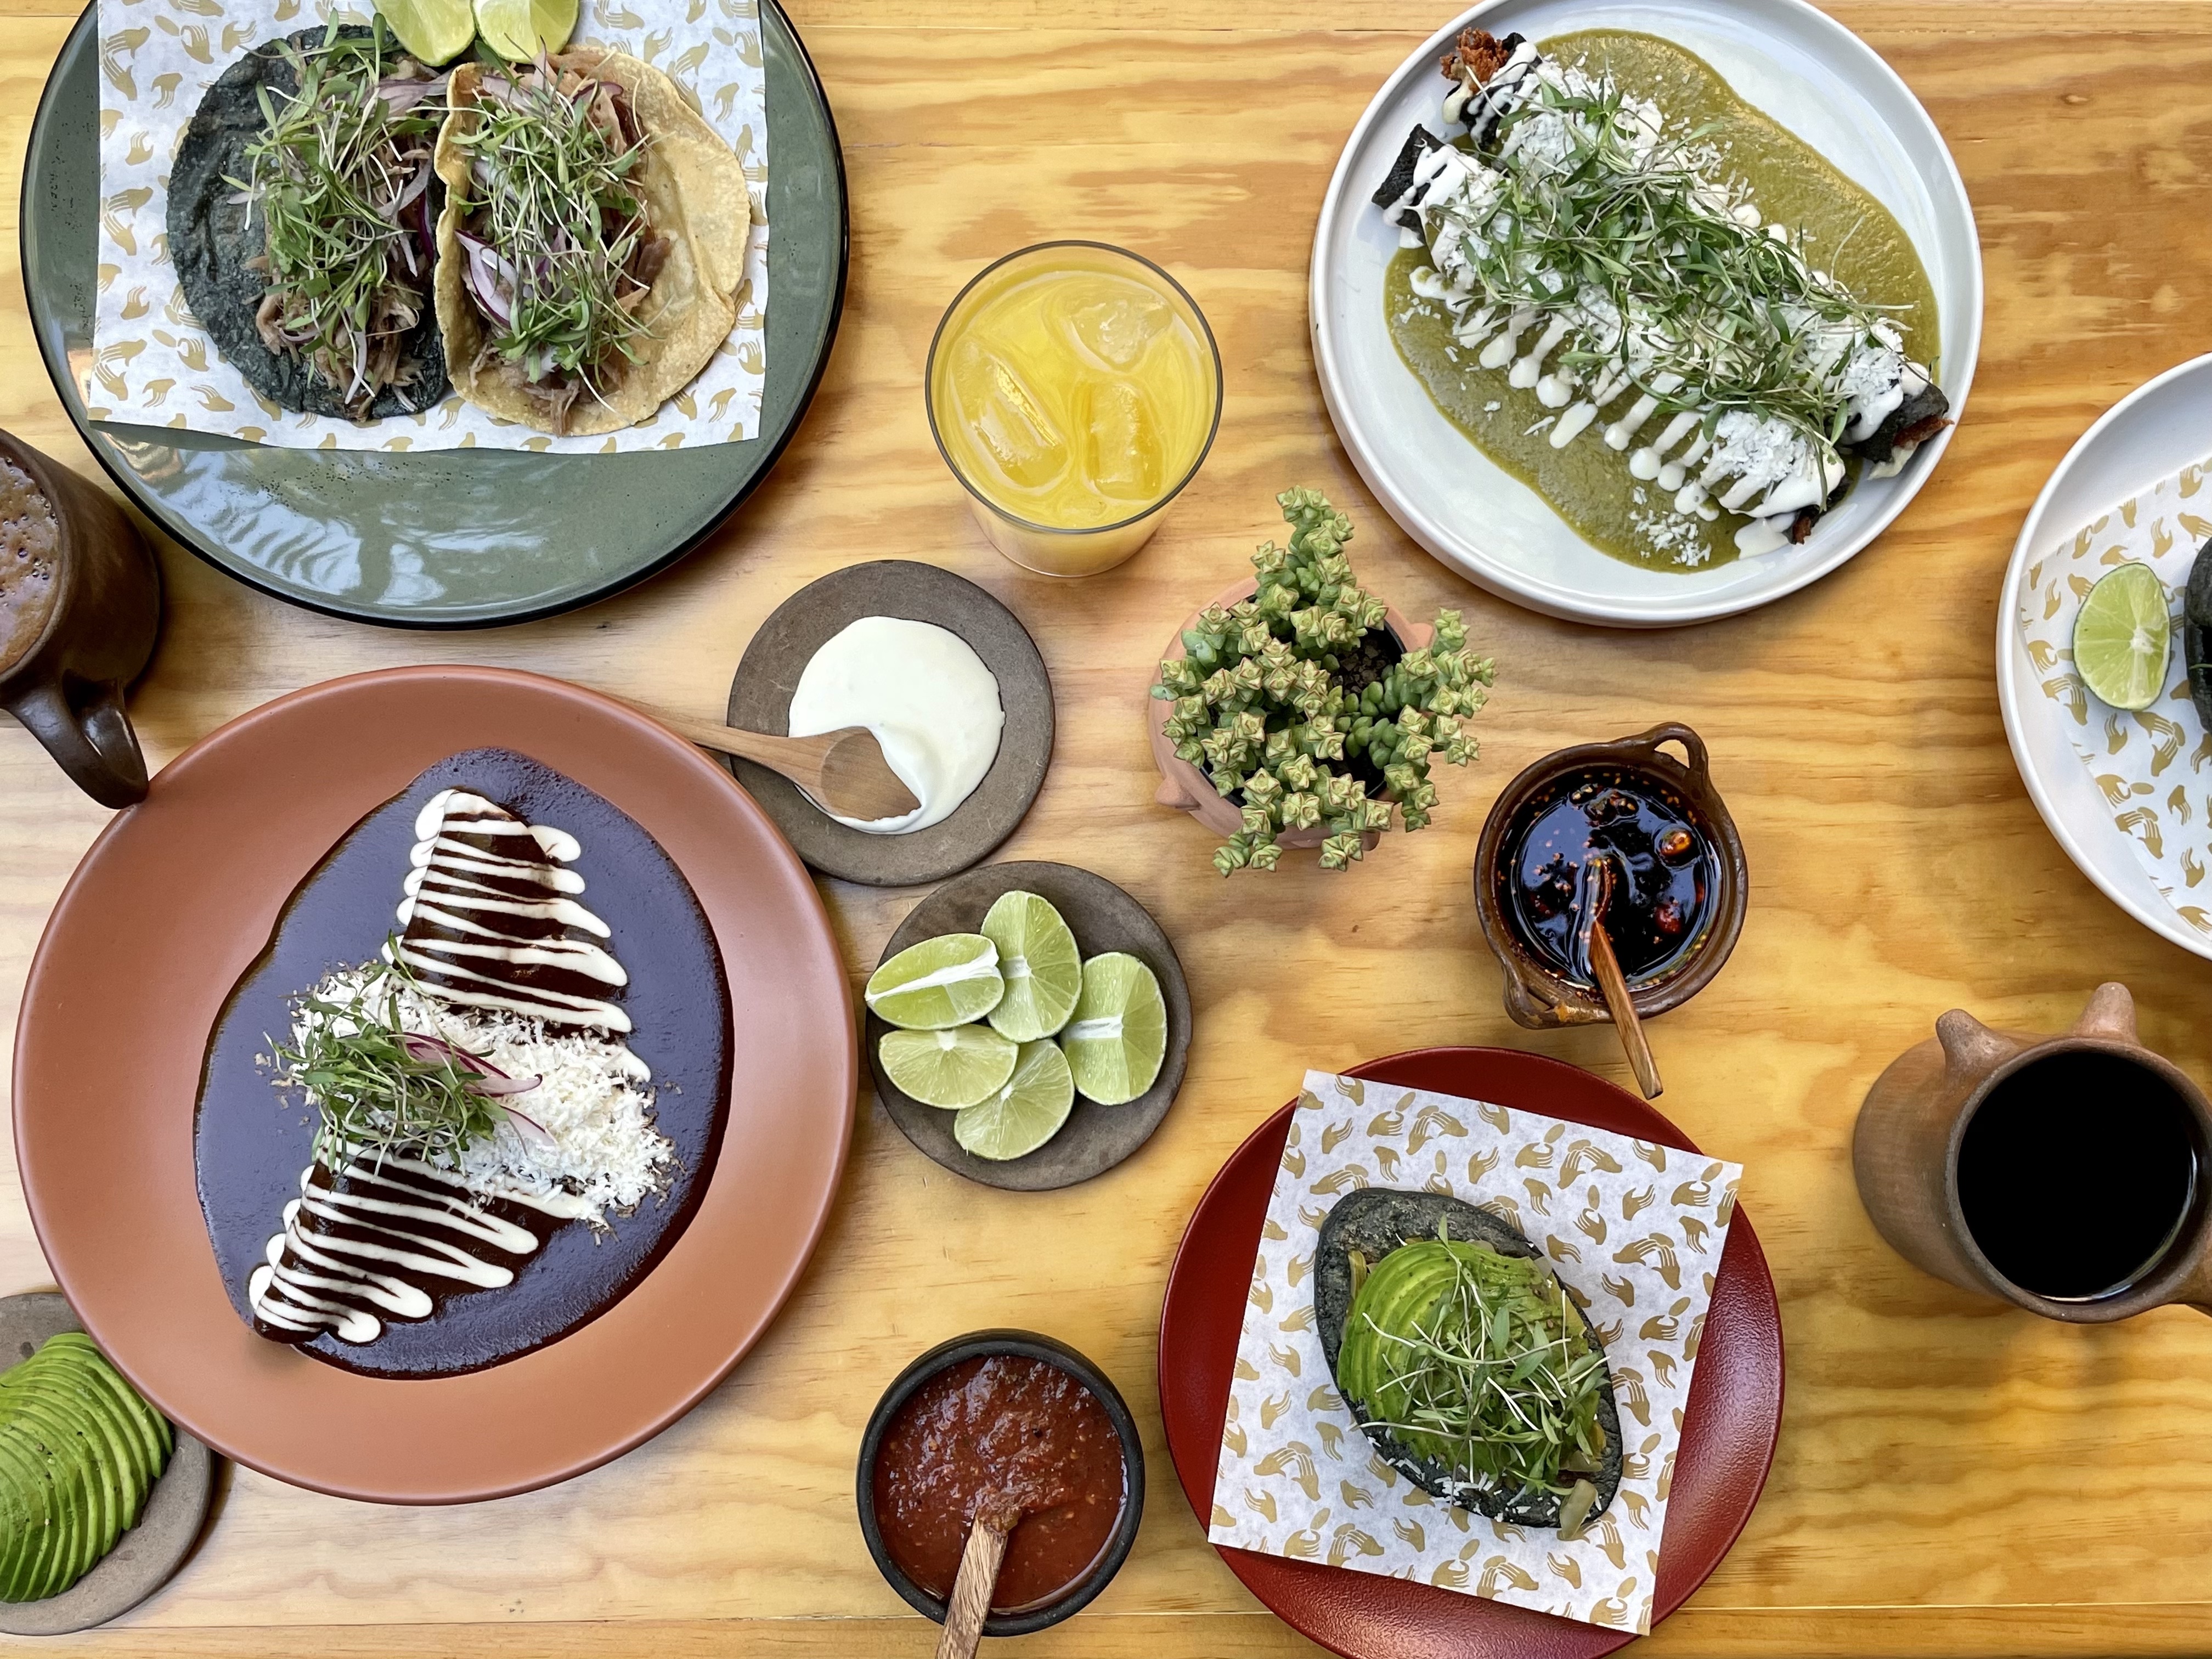 What It's Like to Visit Mexico City Right Now: Great Food, Rising